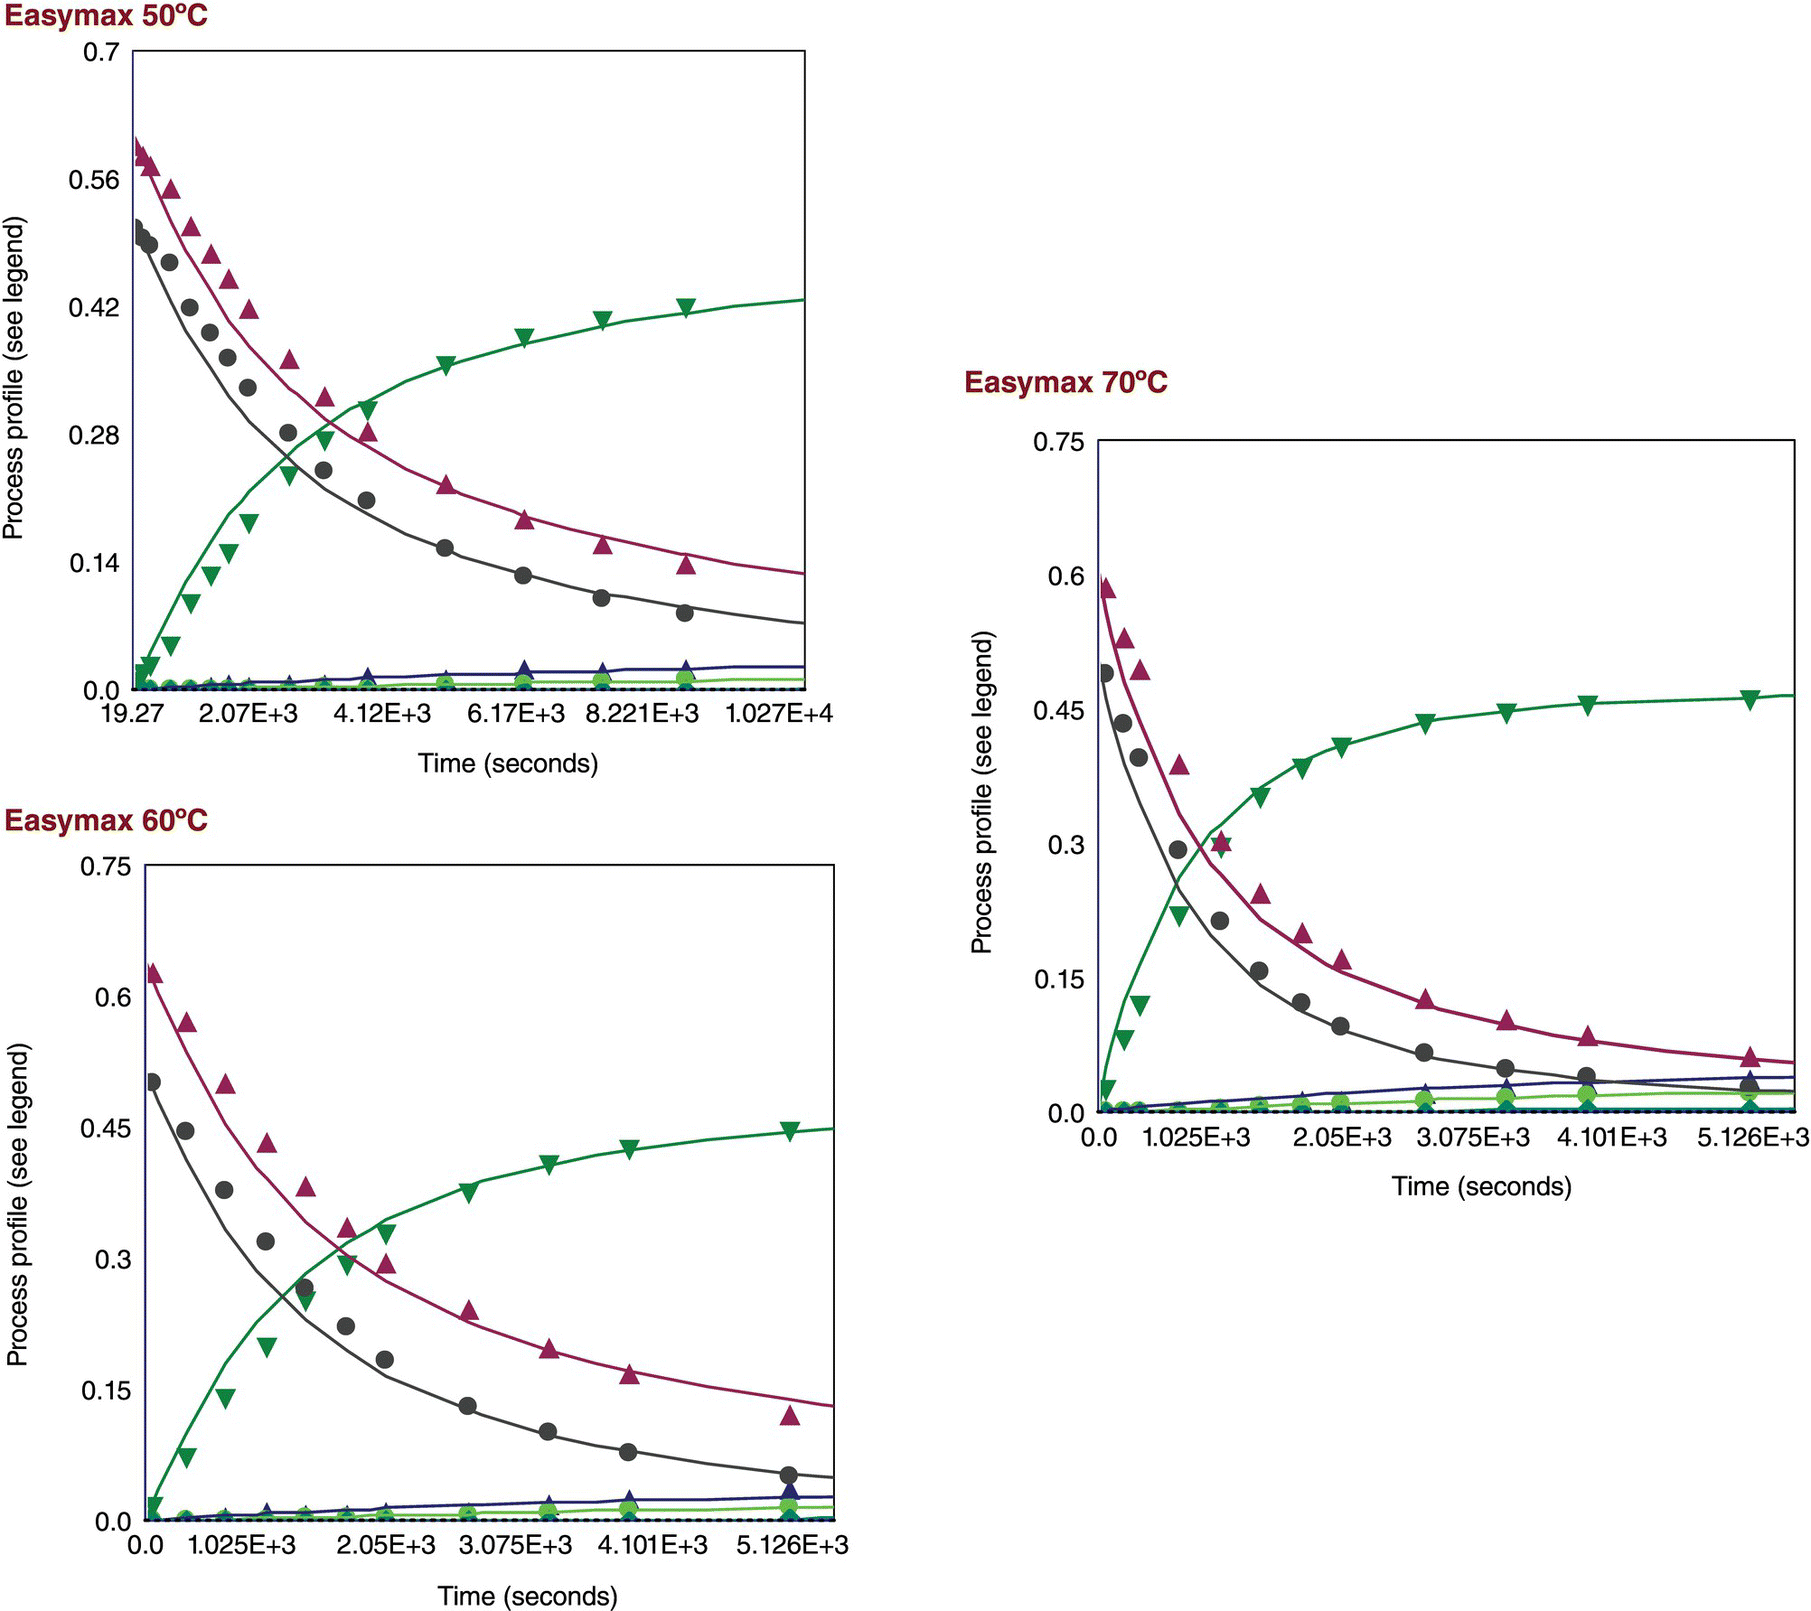 Graph of kinetic model predicted versus actual concentrations at Easymax 50°C (top left), Easymax 60°C (bottom left), and Easymax 70°C (right). Each graph displays 6 curves with markers.